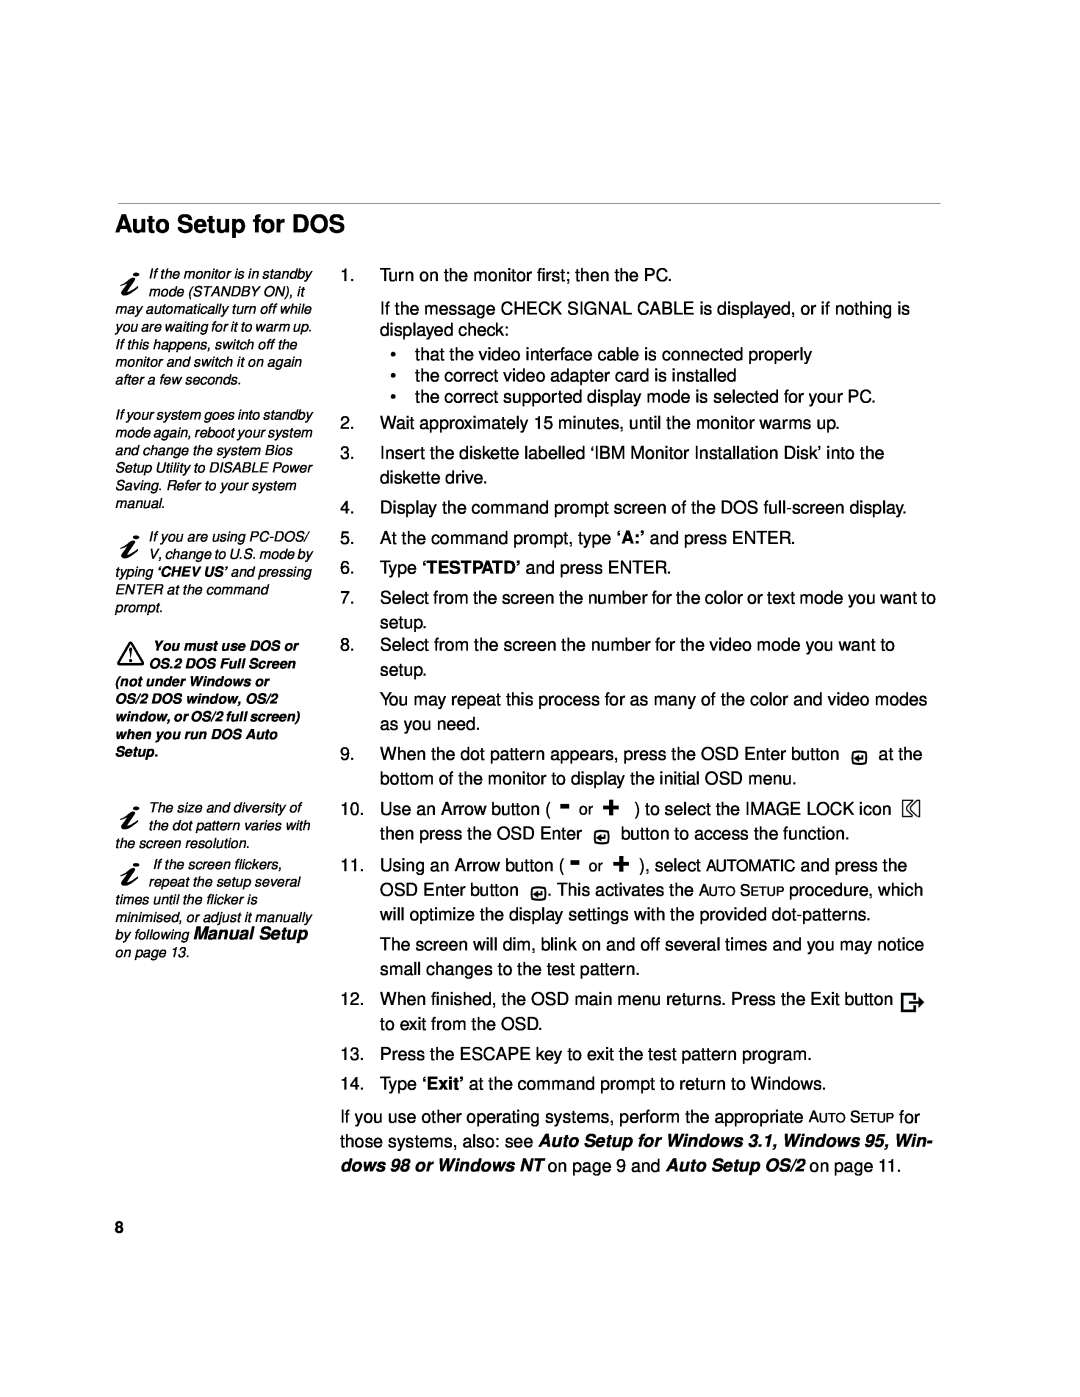 IBM 21L4364, 9519-AW1, 9519-AG1, T 85A Auto Setup for DOS, dows 98 or Windows NT on page 9 and Auto Setup OS/2 on page 